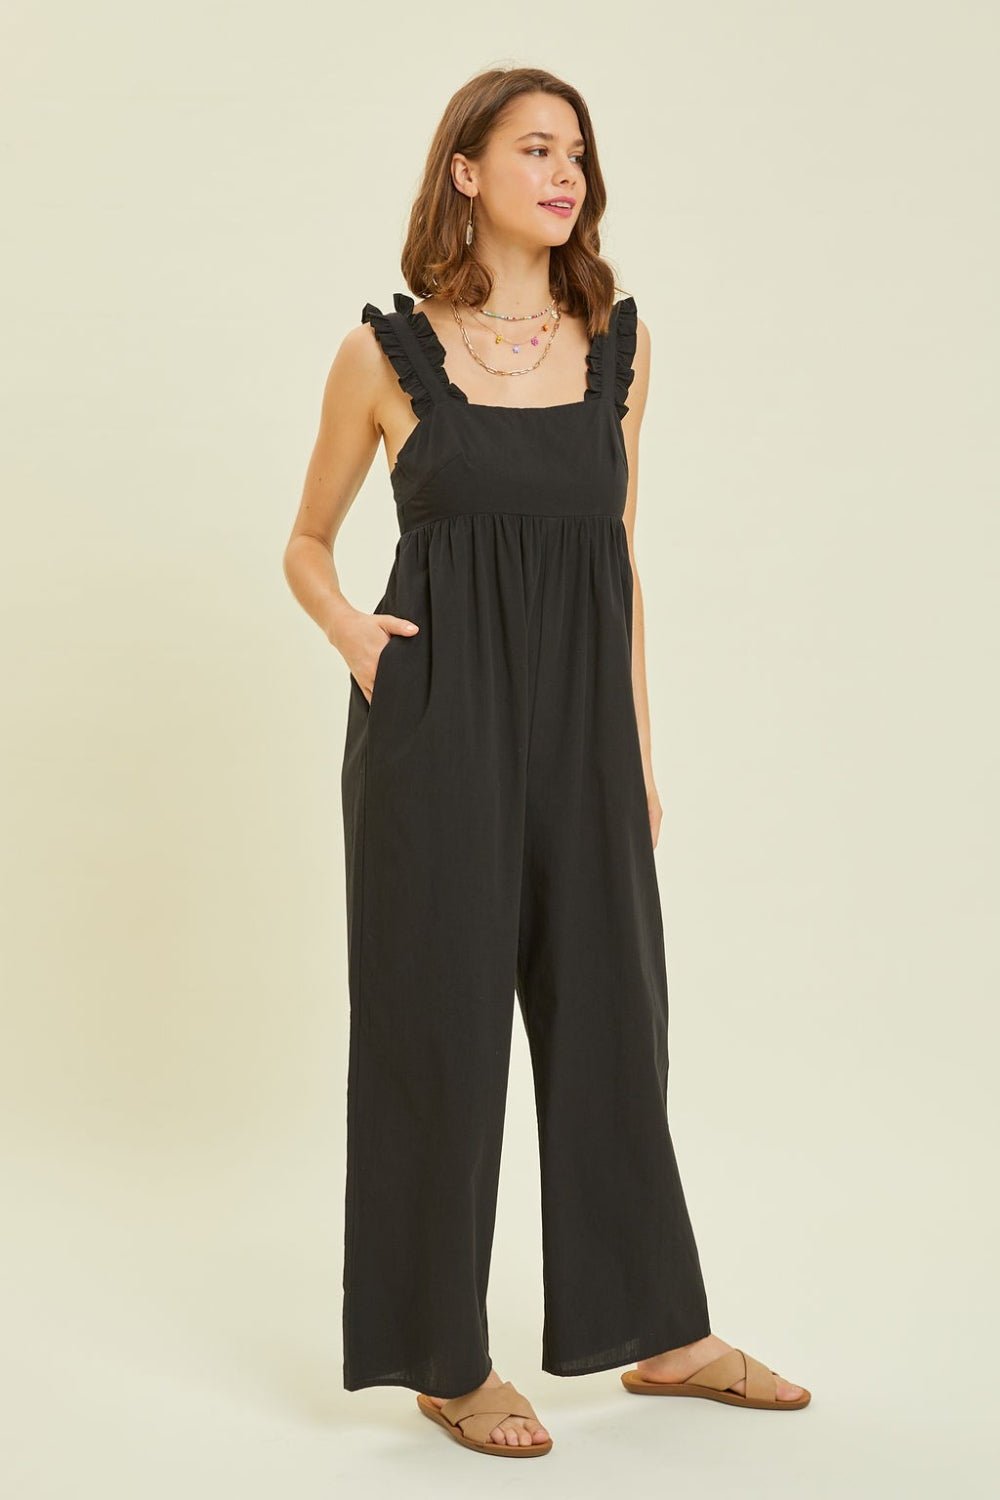 HEYSON Full Size Ruffled Strap Back Tie Wide Leg Jumpsuit - Happily Ever Atchison Shop Co.